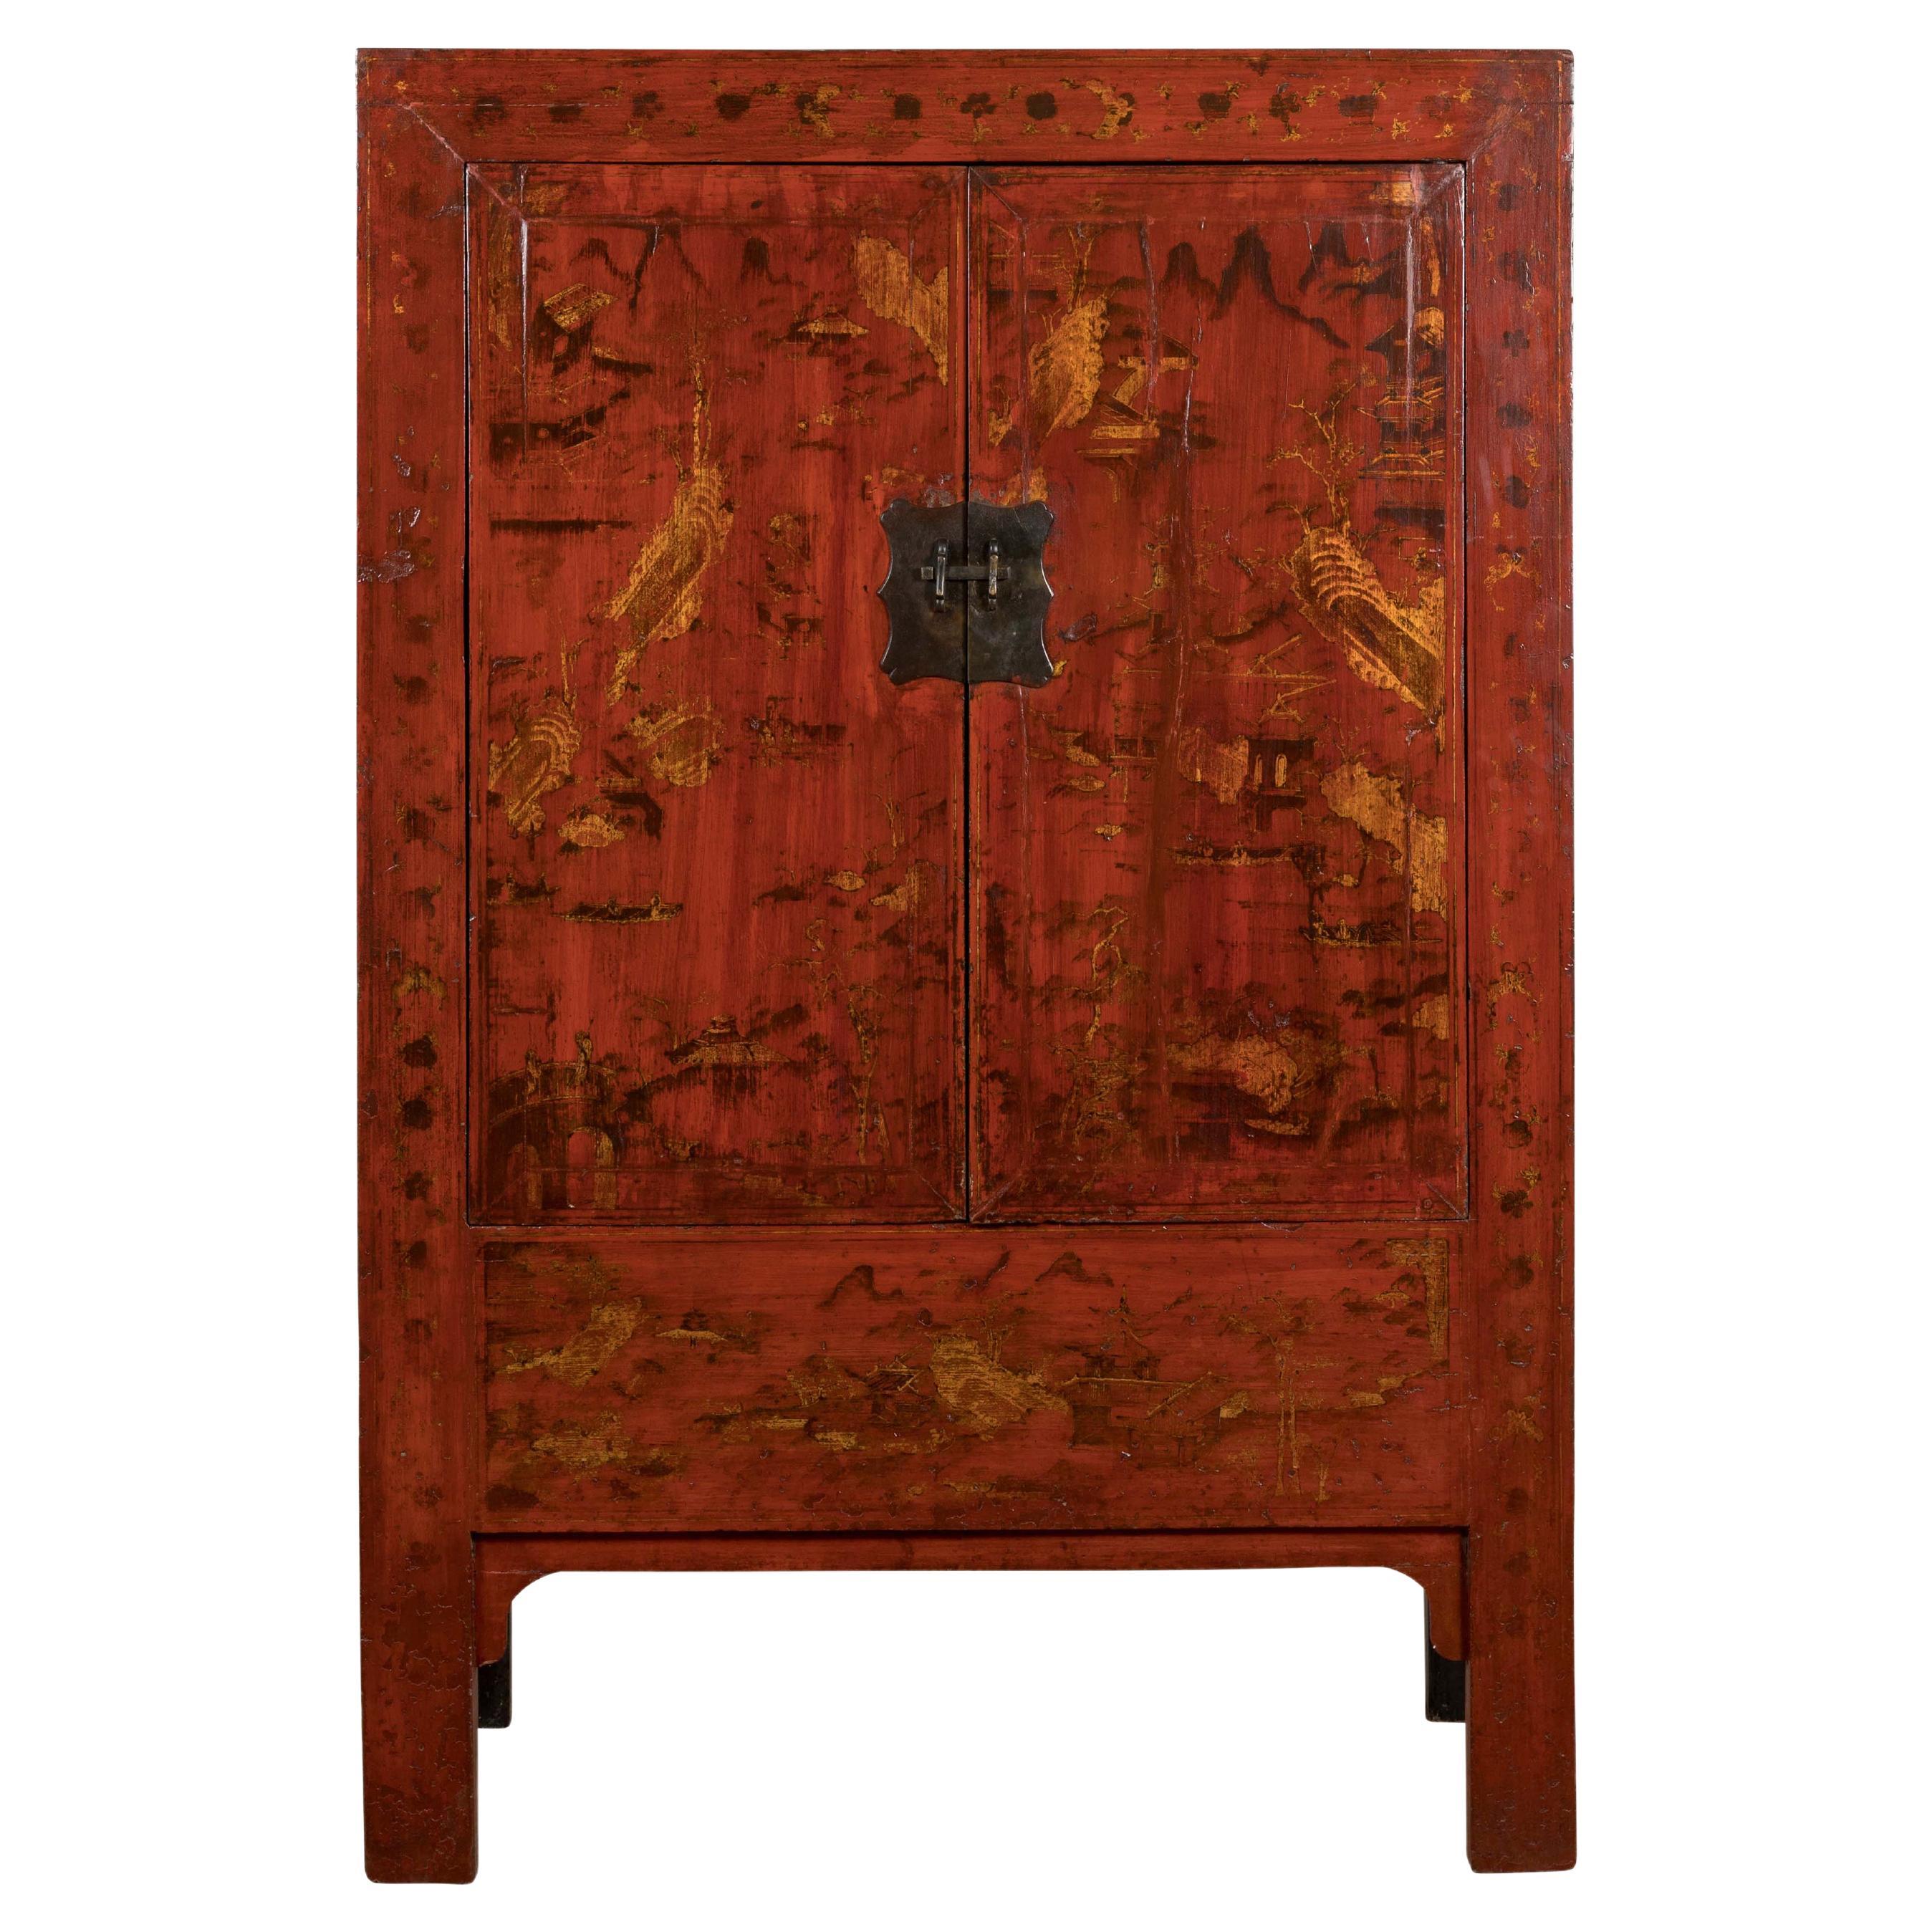 Large Red Antique Cabinet with Gold Painted Scenes